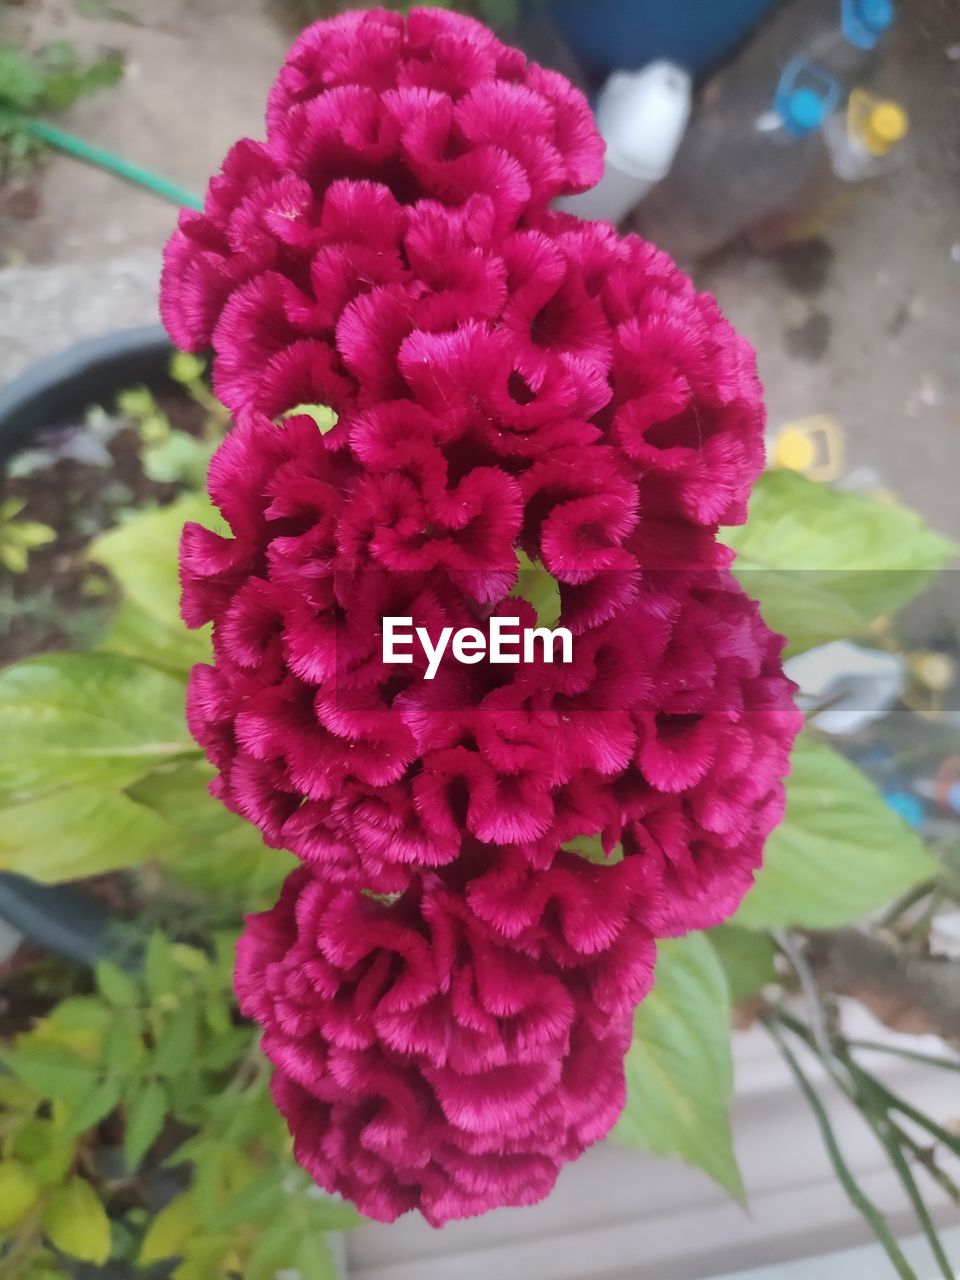 flower, flowering plant, plant, freshness, close-up, beauty in nature, fragility, nature, petal, pink, focus on foreground, growth, flower head, inflorescence, day, no people, outdoors, plant part, leaf, bunch of flowers